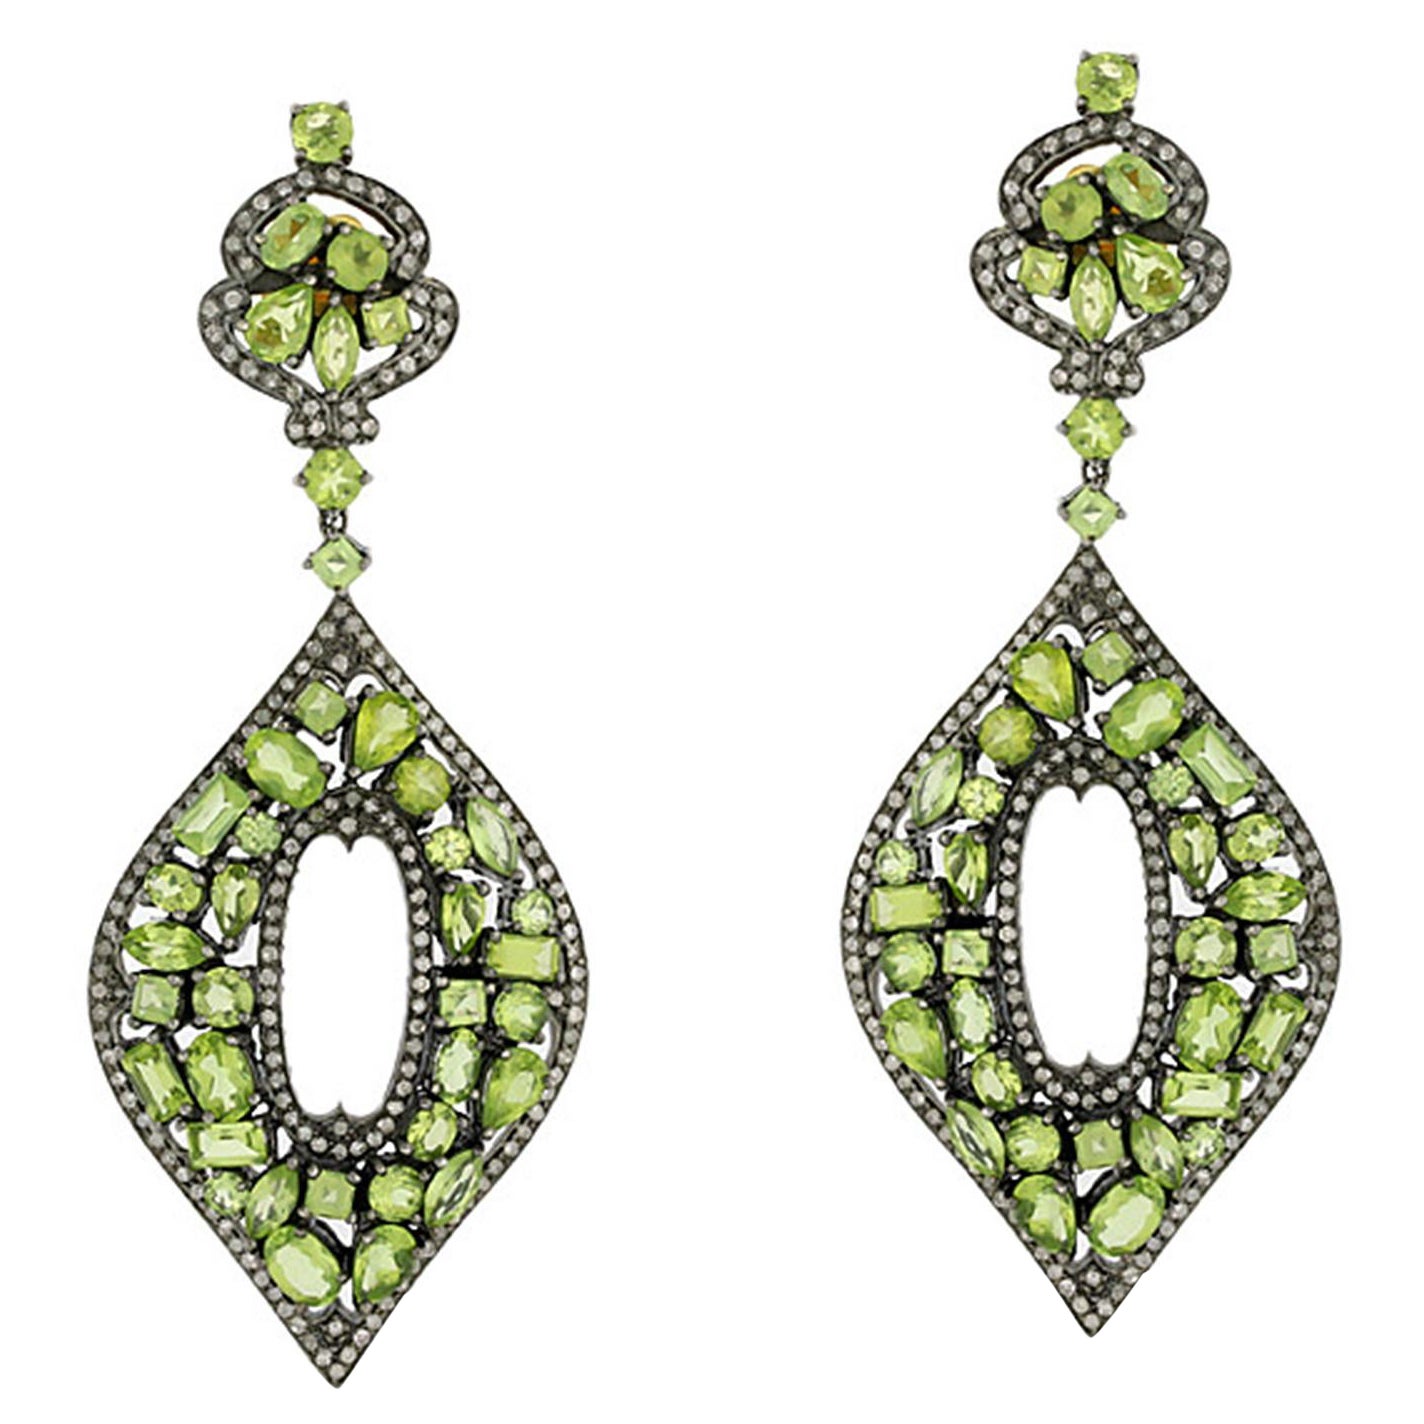 Marquise Shaped Peridot & Diamonds Earrings Made in 18k Yellow Gold & Silver